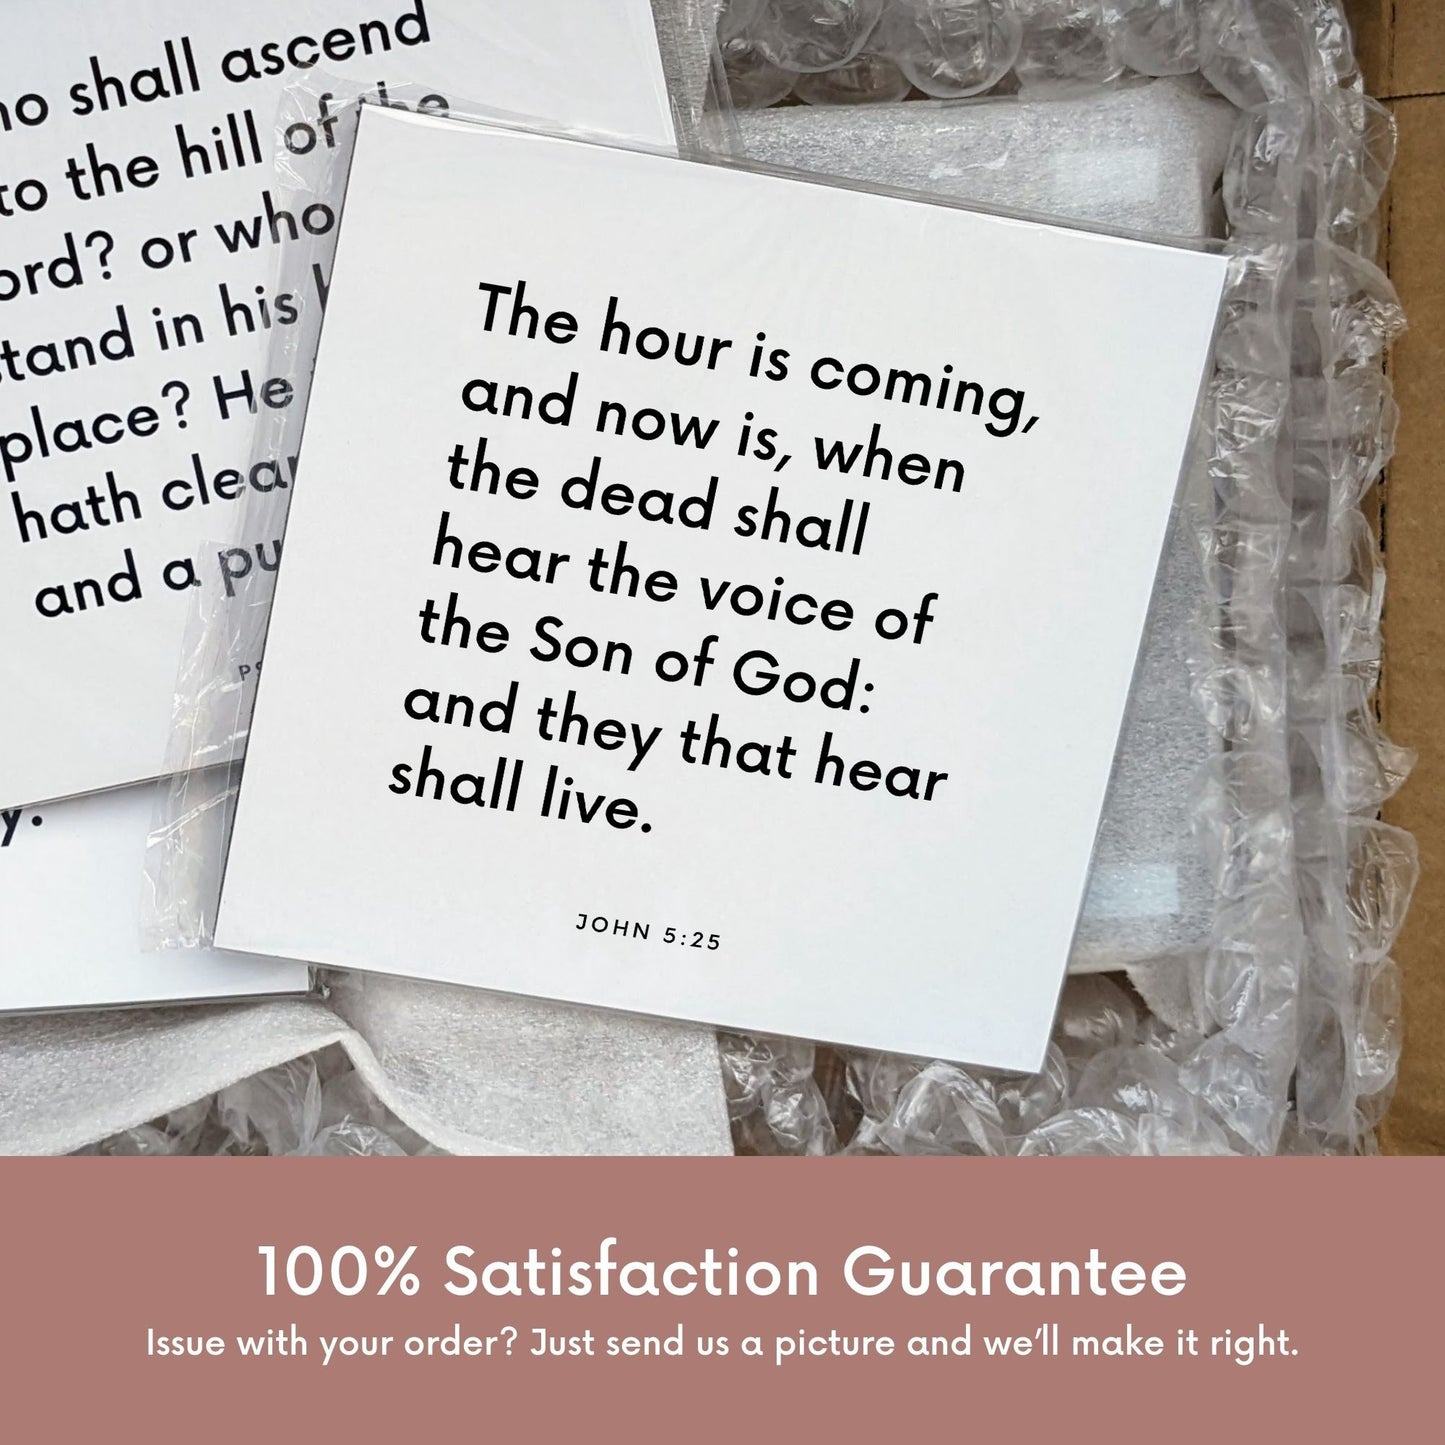 Shipping materials for scripture tile of John 5:25 - "The dead shall hear the voice of the Son of God"